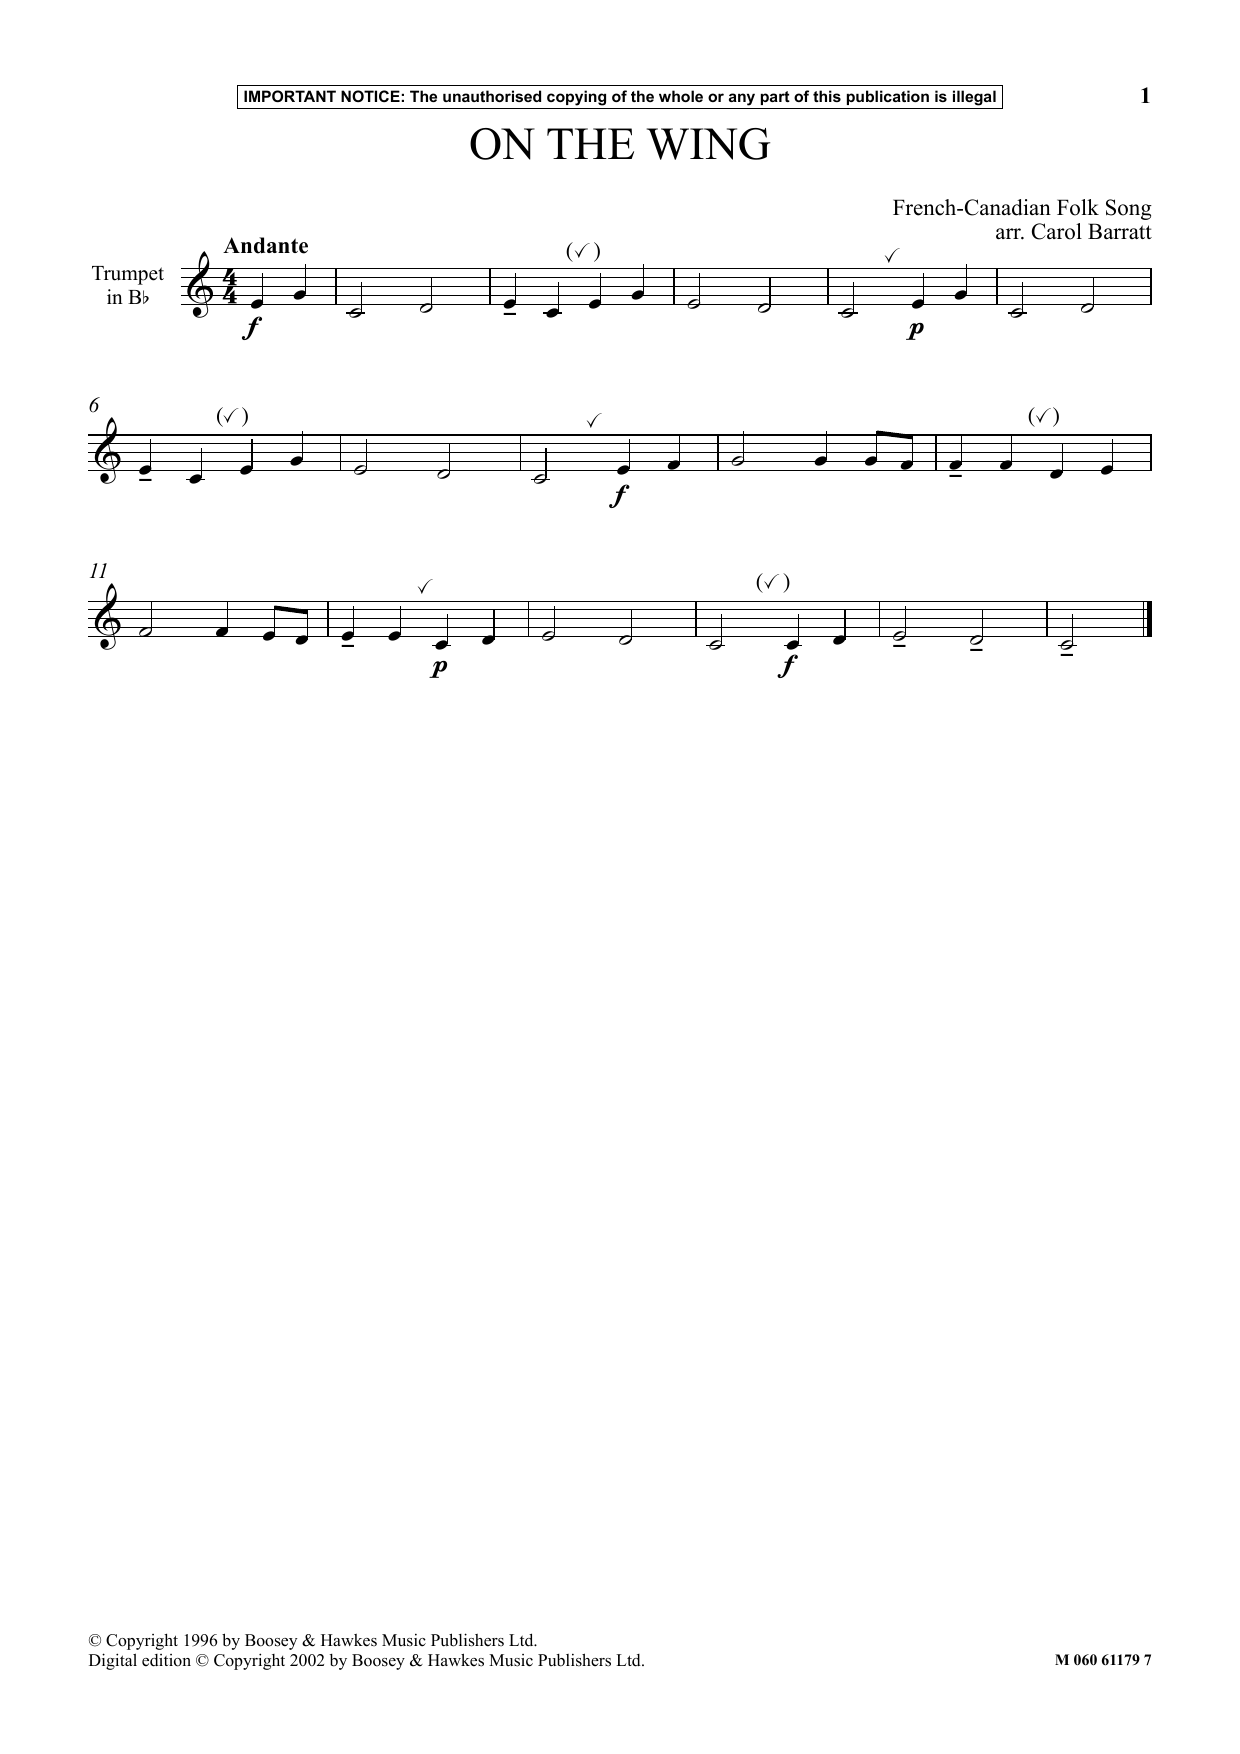 Download French-Canadian Folk Song On The Wing Sheet Music